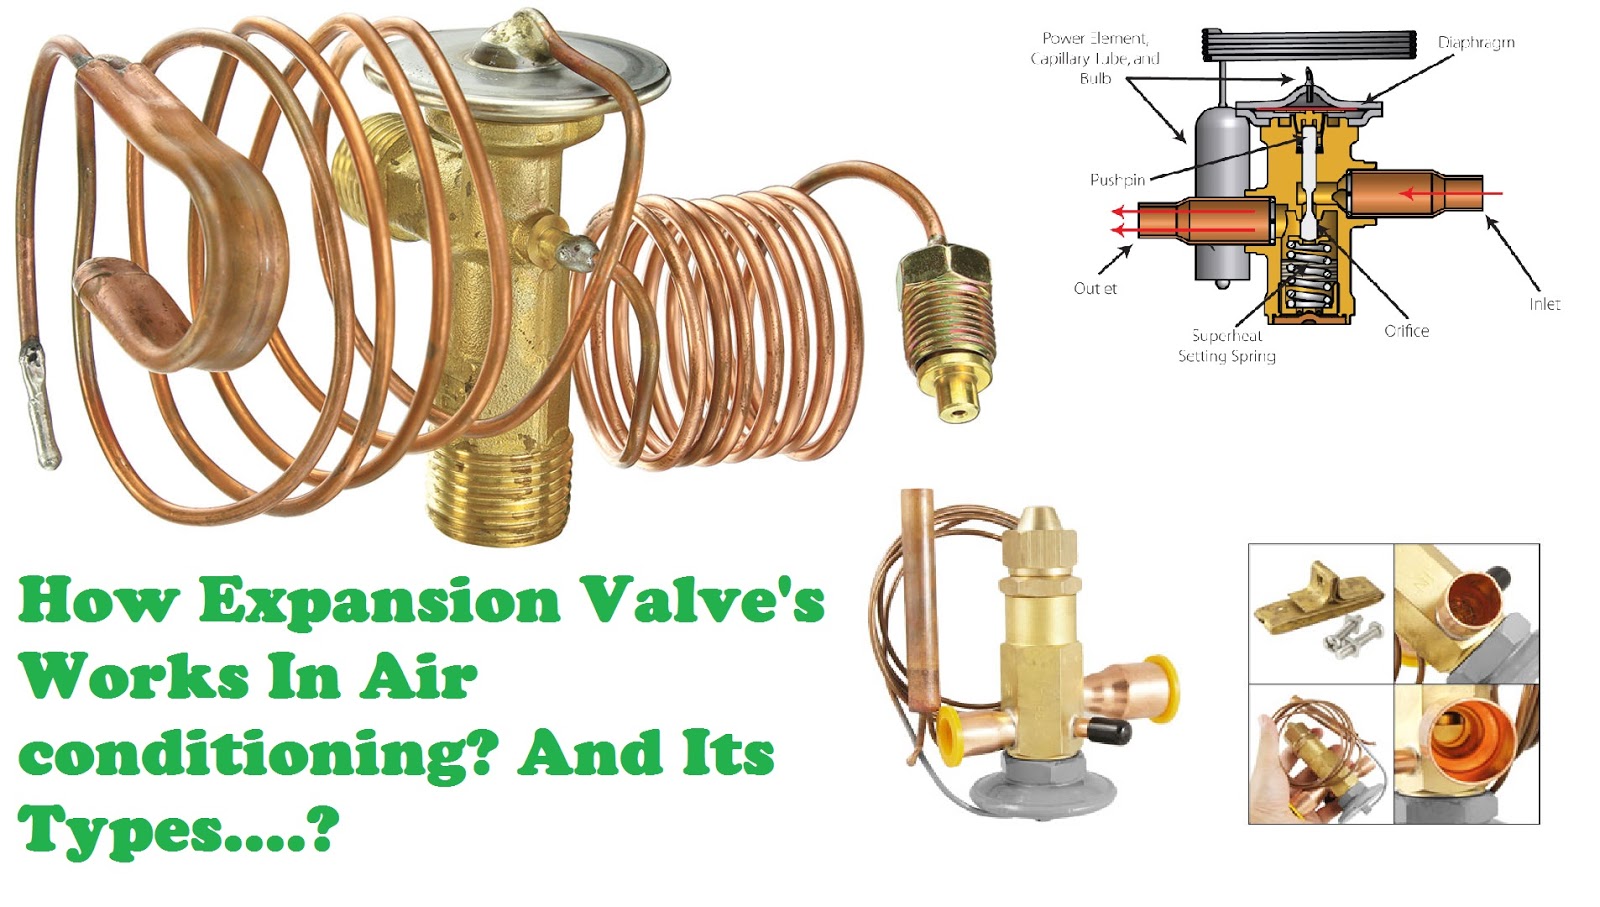 HowMechanismWorks ?: How Expansion Valve's Works In Air conditioning